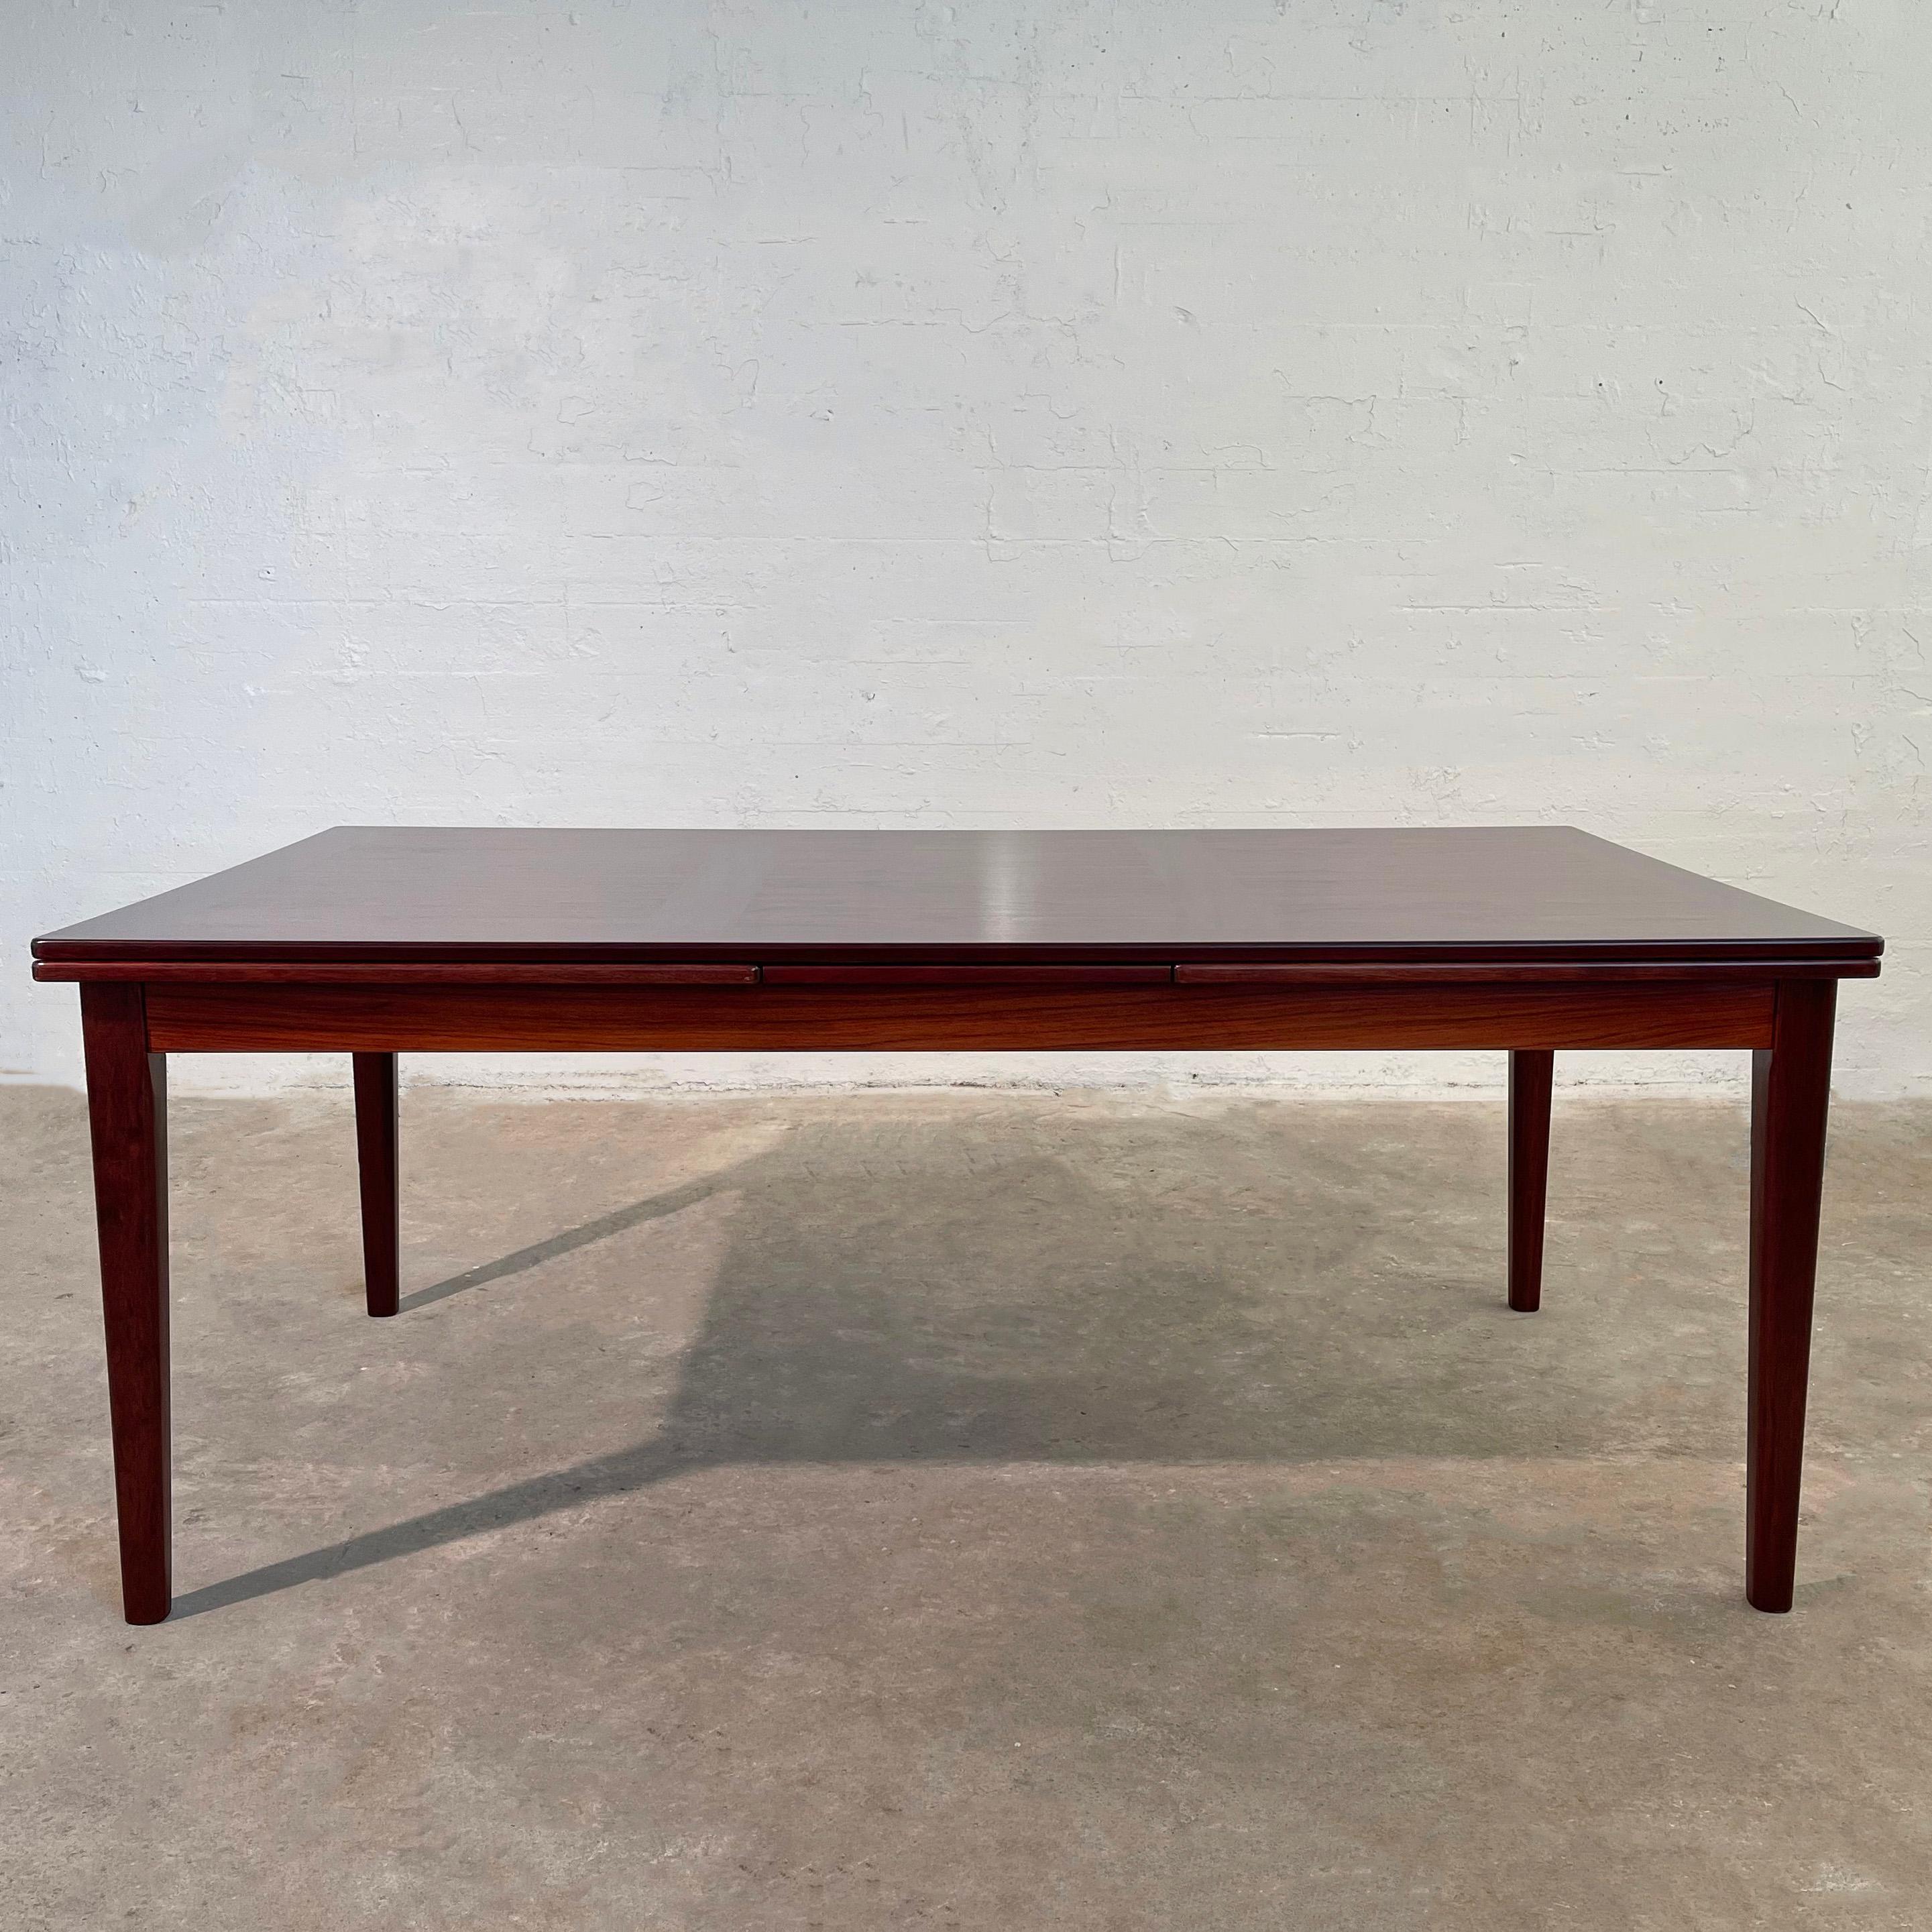 Scandinavian modern, rosewood, extension dining table by Danish maker Scovby Mobelfabrik features two 27.5 inch leaves that are stored within the table at each end to extend from 71 to 126 inches. The table has an exceptional rosewood grain with a